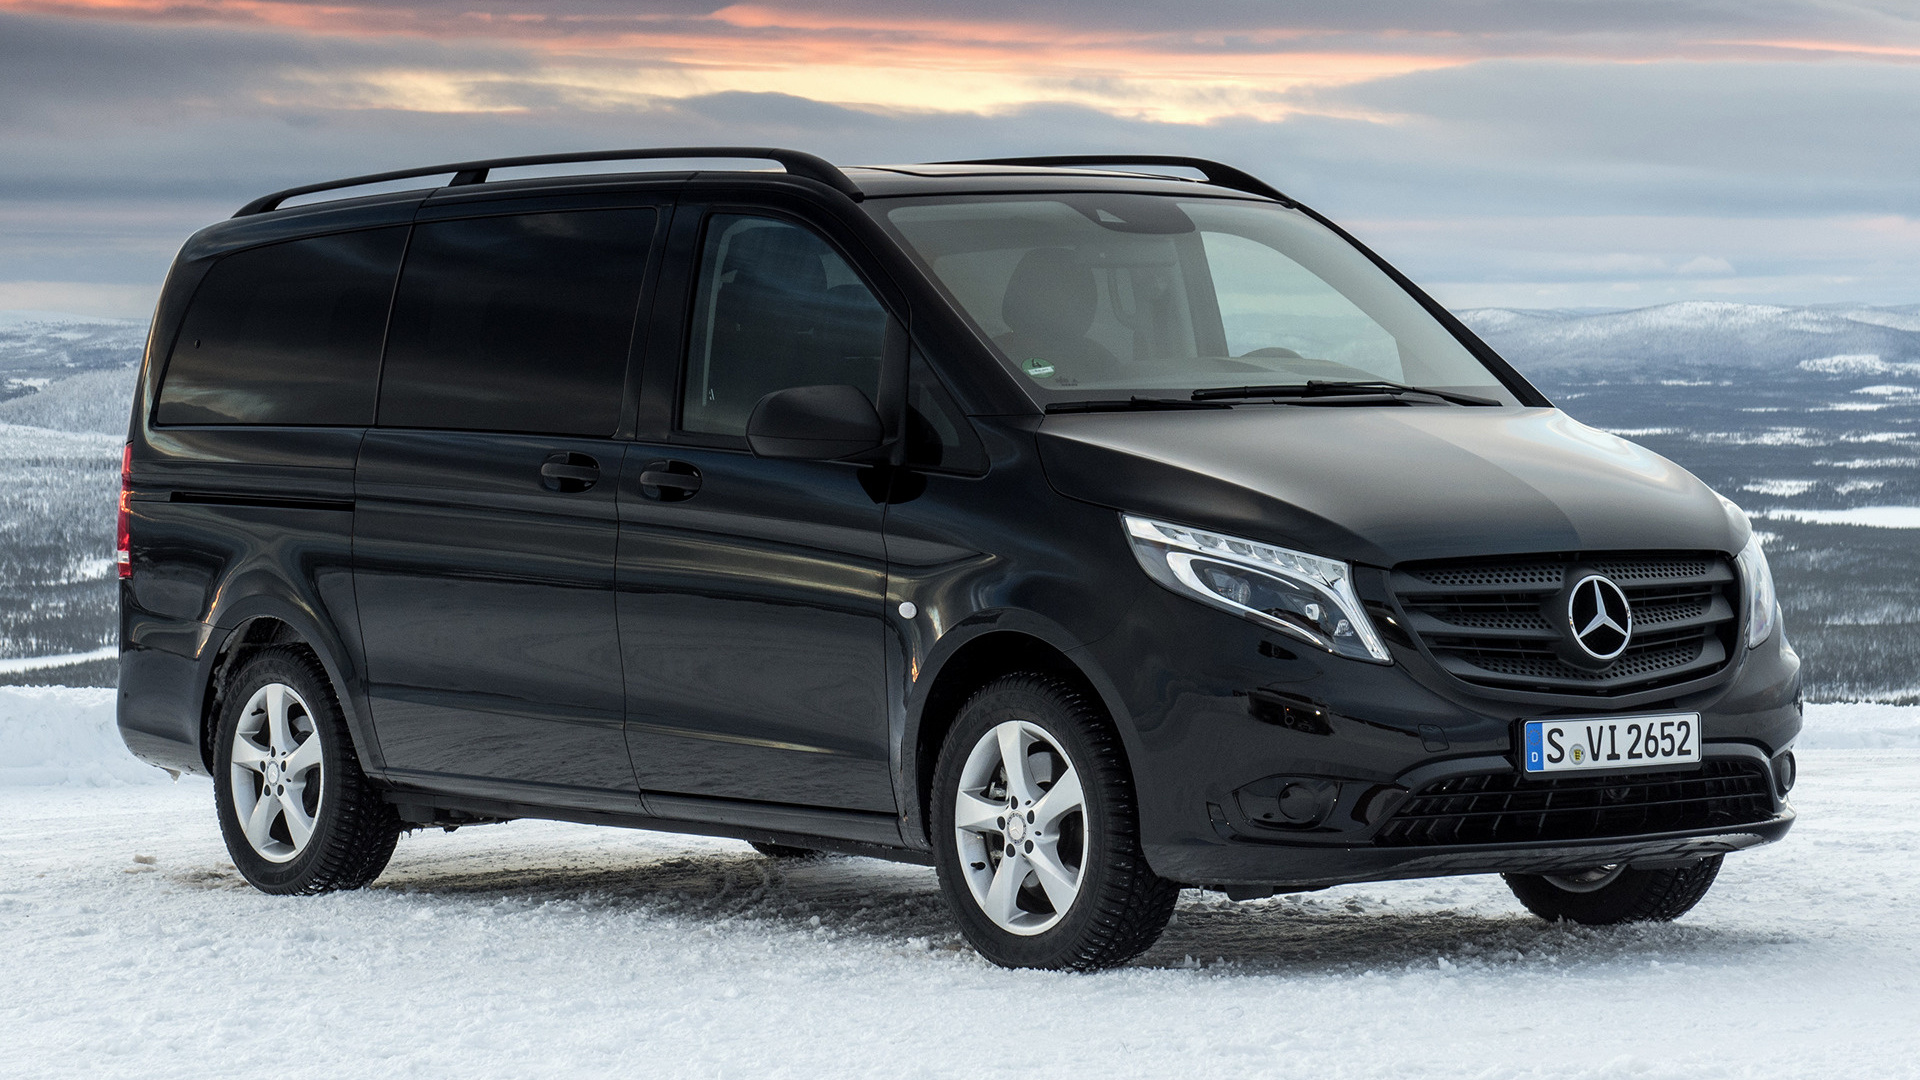 2014 MercedesBenz Vito [Long] Wallpapers and HD Images